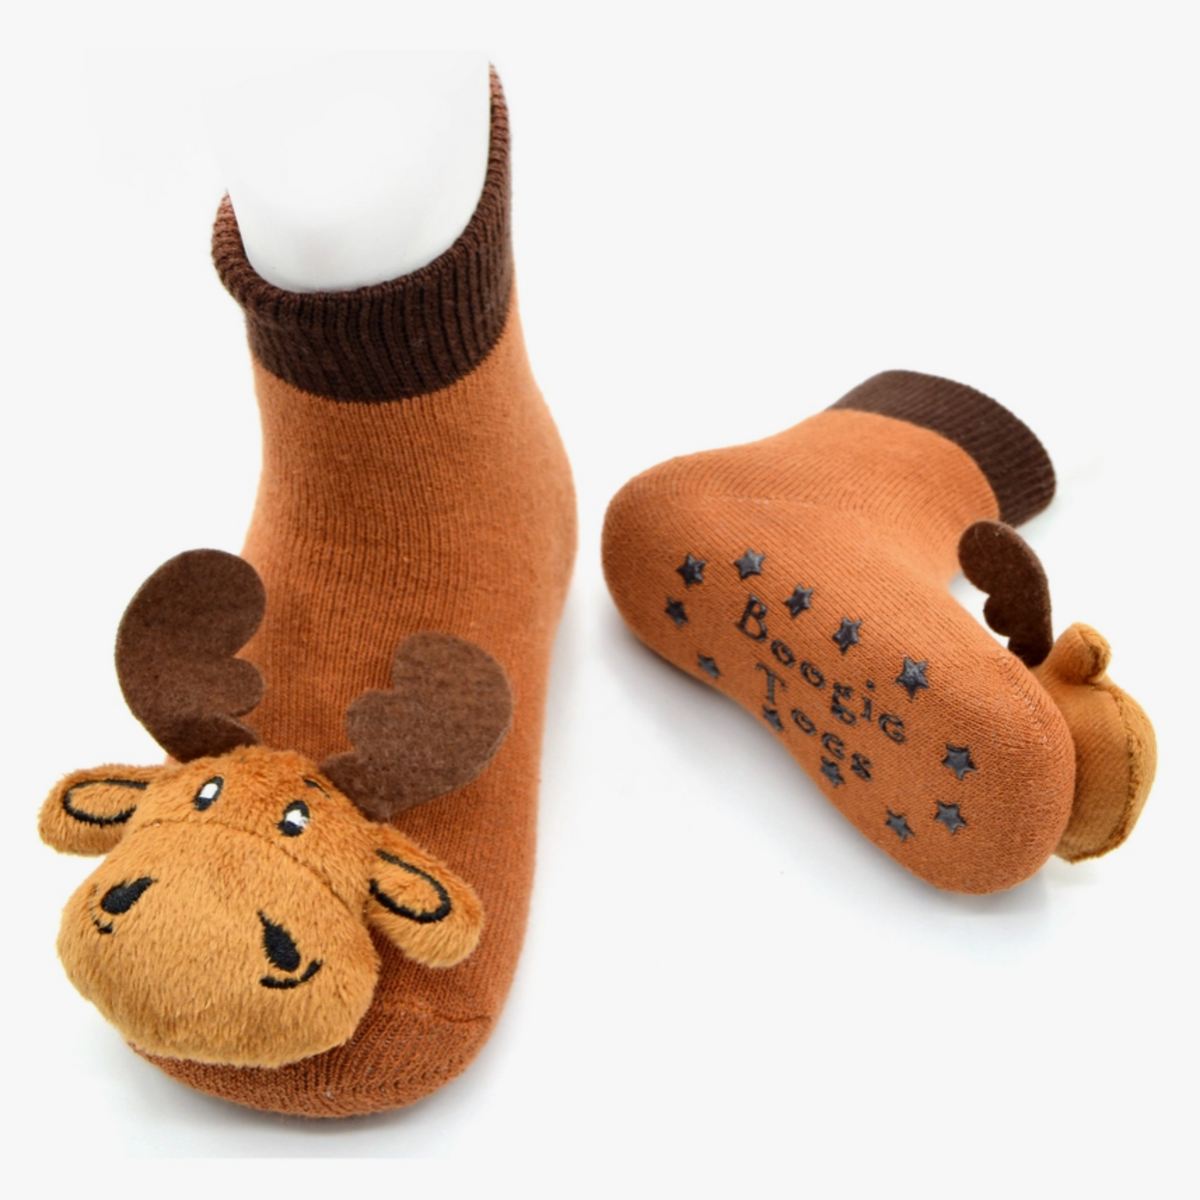 Piero Liventi Boogie Toes rattle baby sock featuring brown sock with brown moose on display